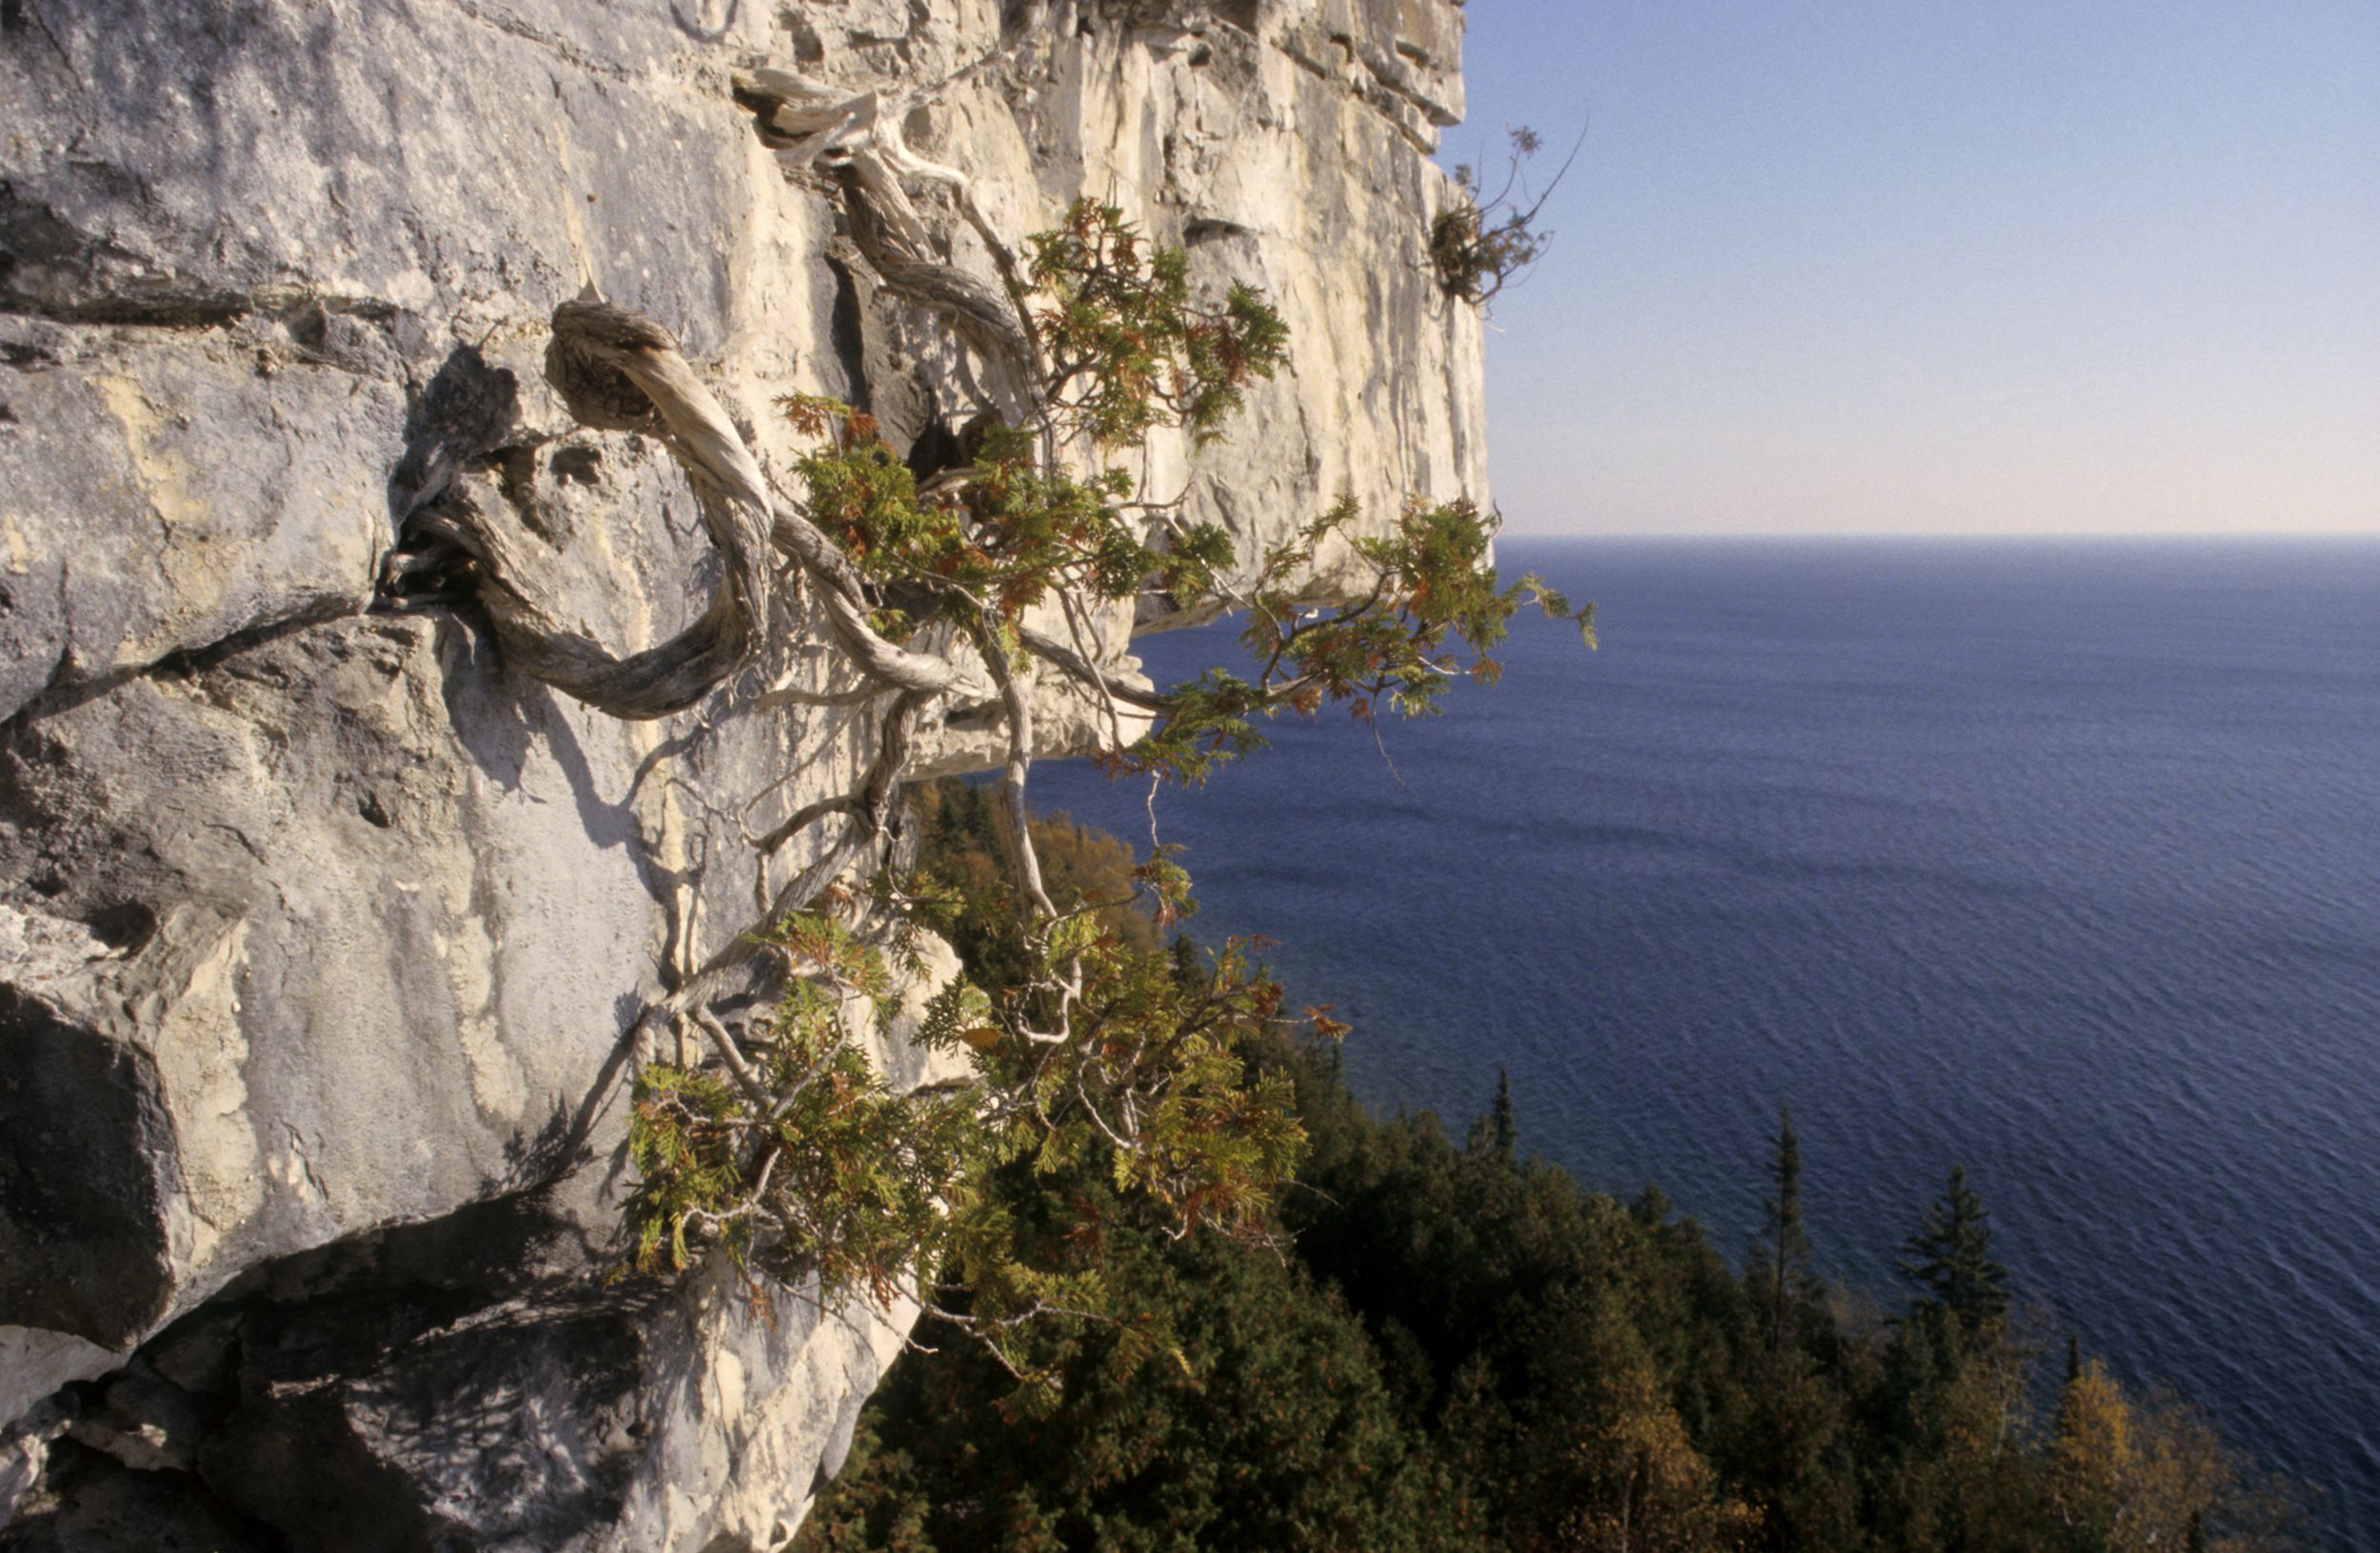 A cliffside cedar grows from a crack in a rock face, overlooking Lake Huron with a clear sky in the background.